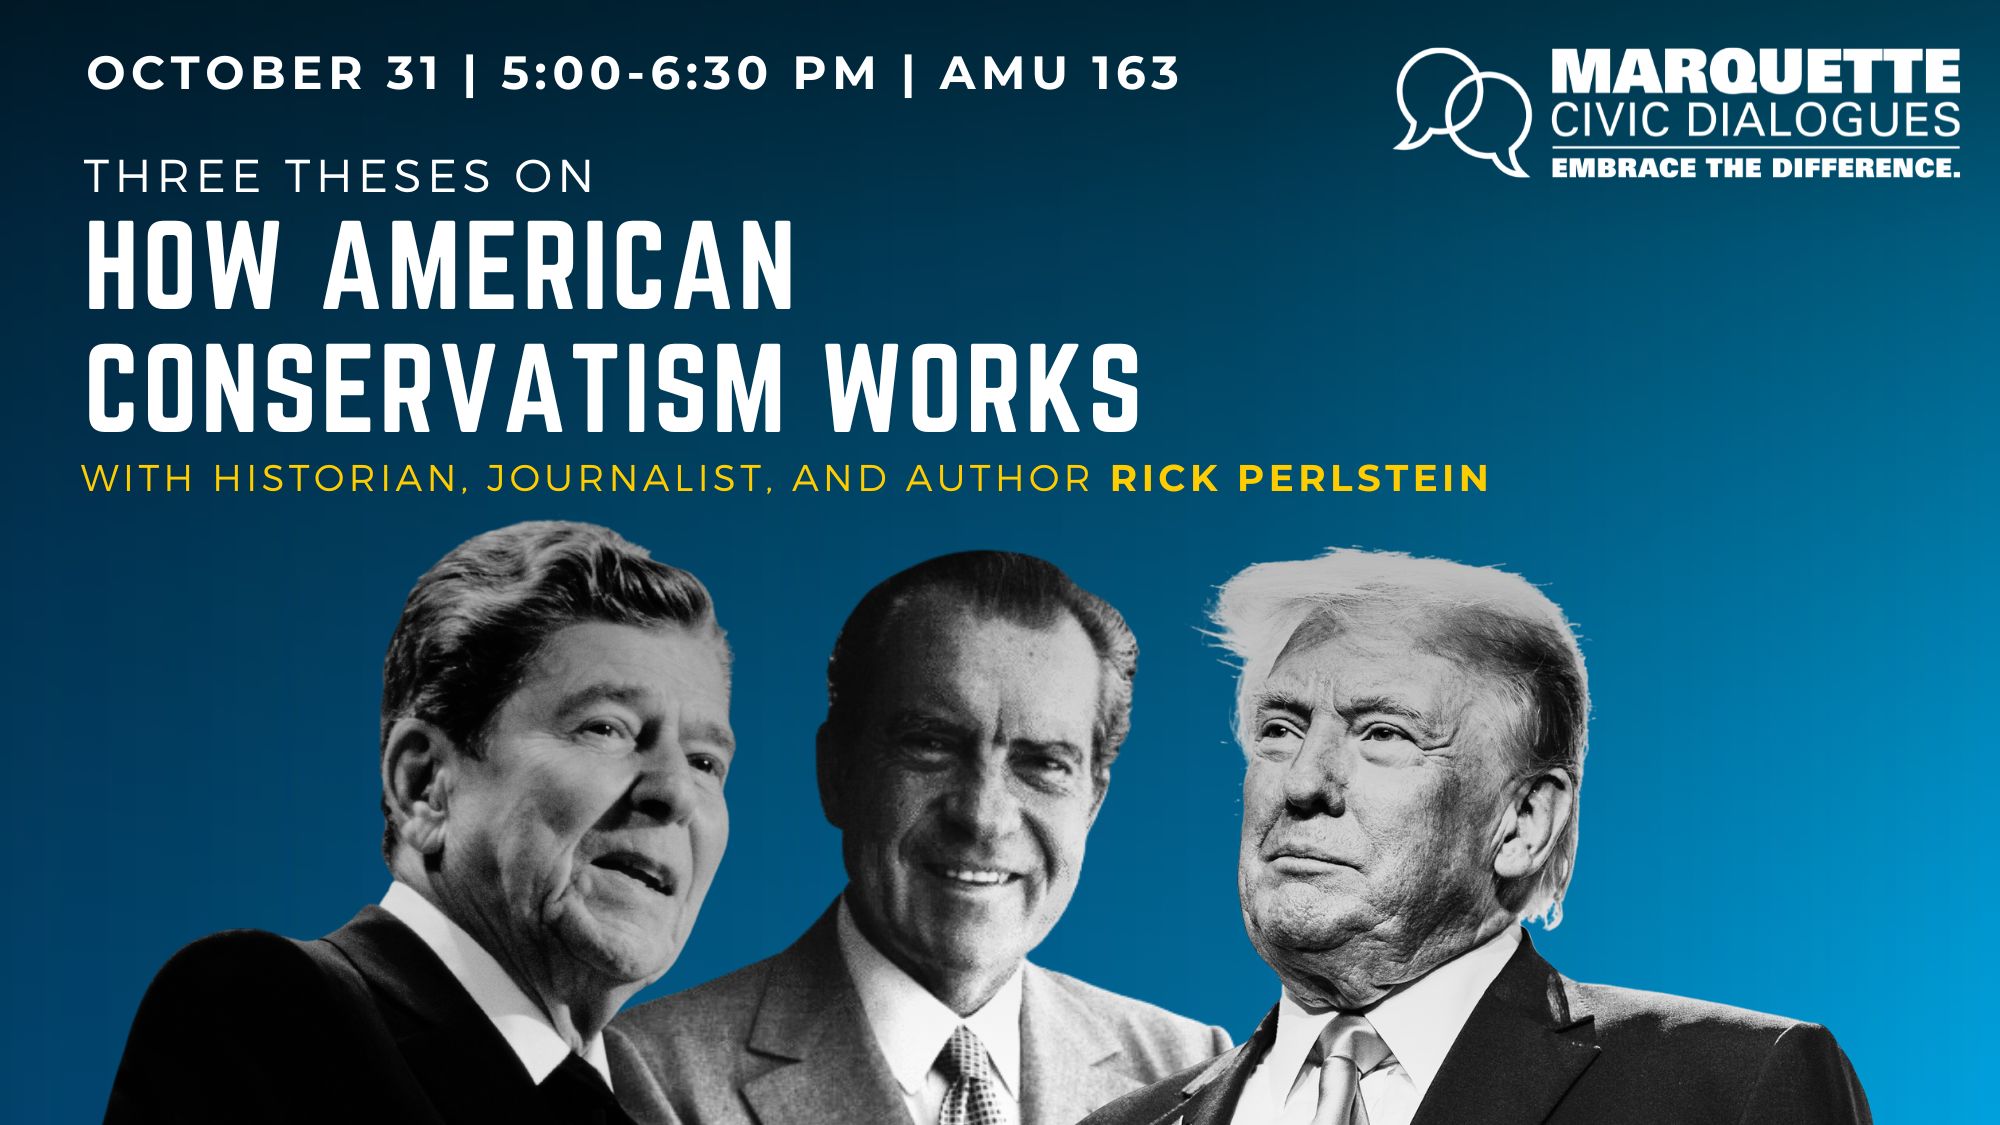 Join Marquette Civic Dialogues for a discussion with American historian and journalist Rick Perlstein for his talk " The Dog and His Mutton, the Authoritarian Ratchet, and the Janus Face:  Three Theses on How Conservatism Works."  Following Perlstein's talk, Marquette Professor Julia Azari will join the discussion for a deeper dive into the issues.  A Q&A with the audience will follow as time permits.